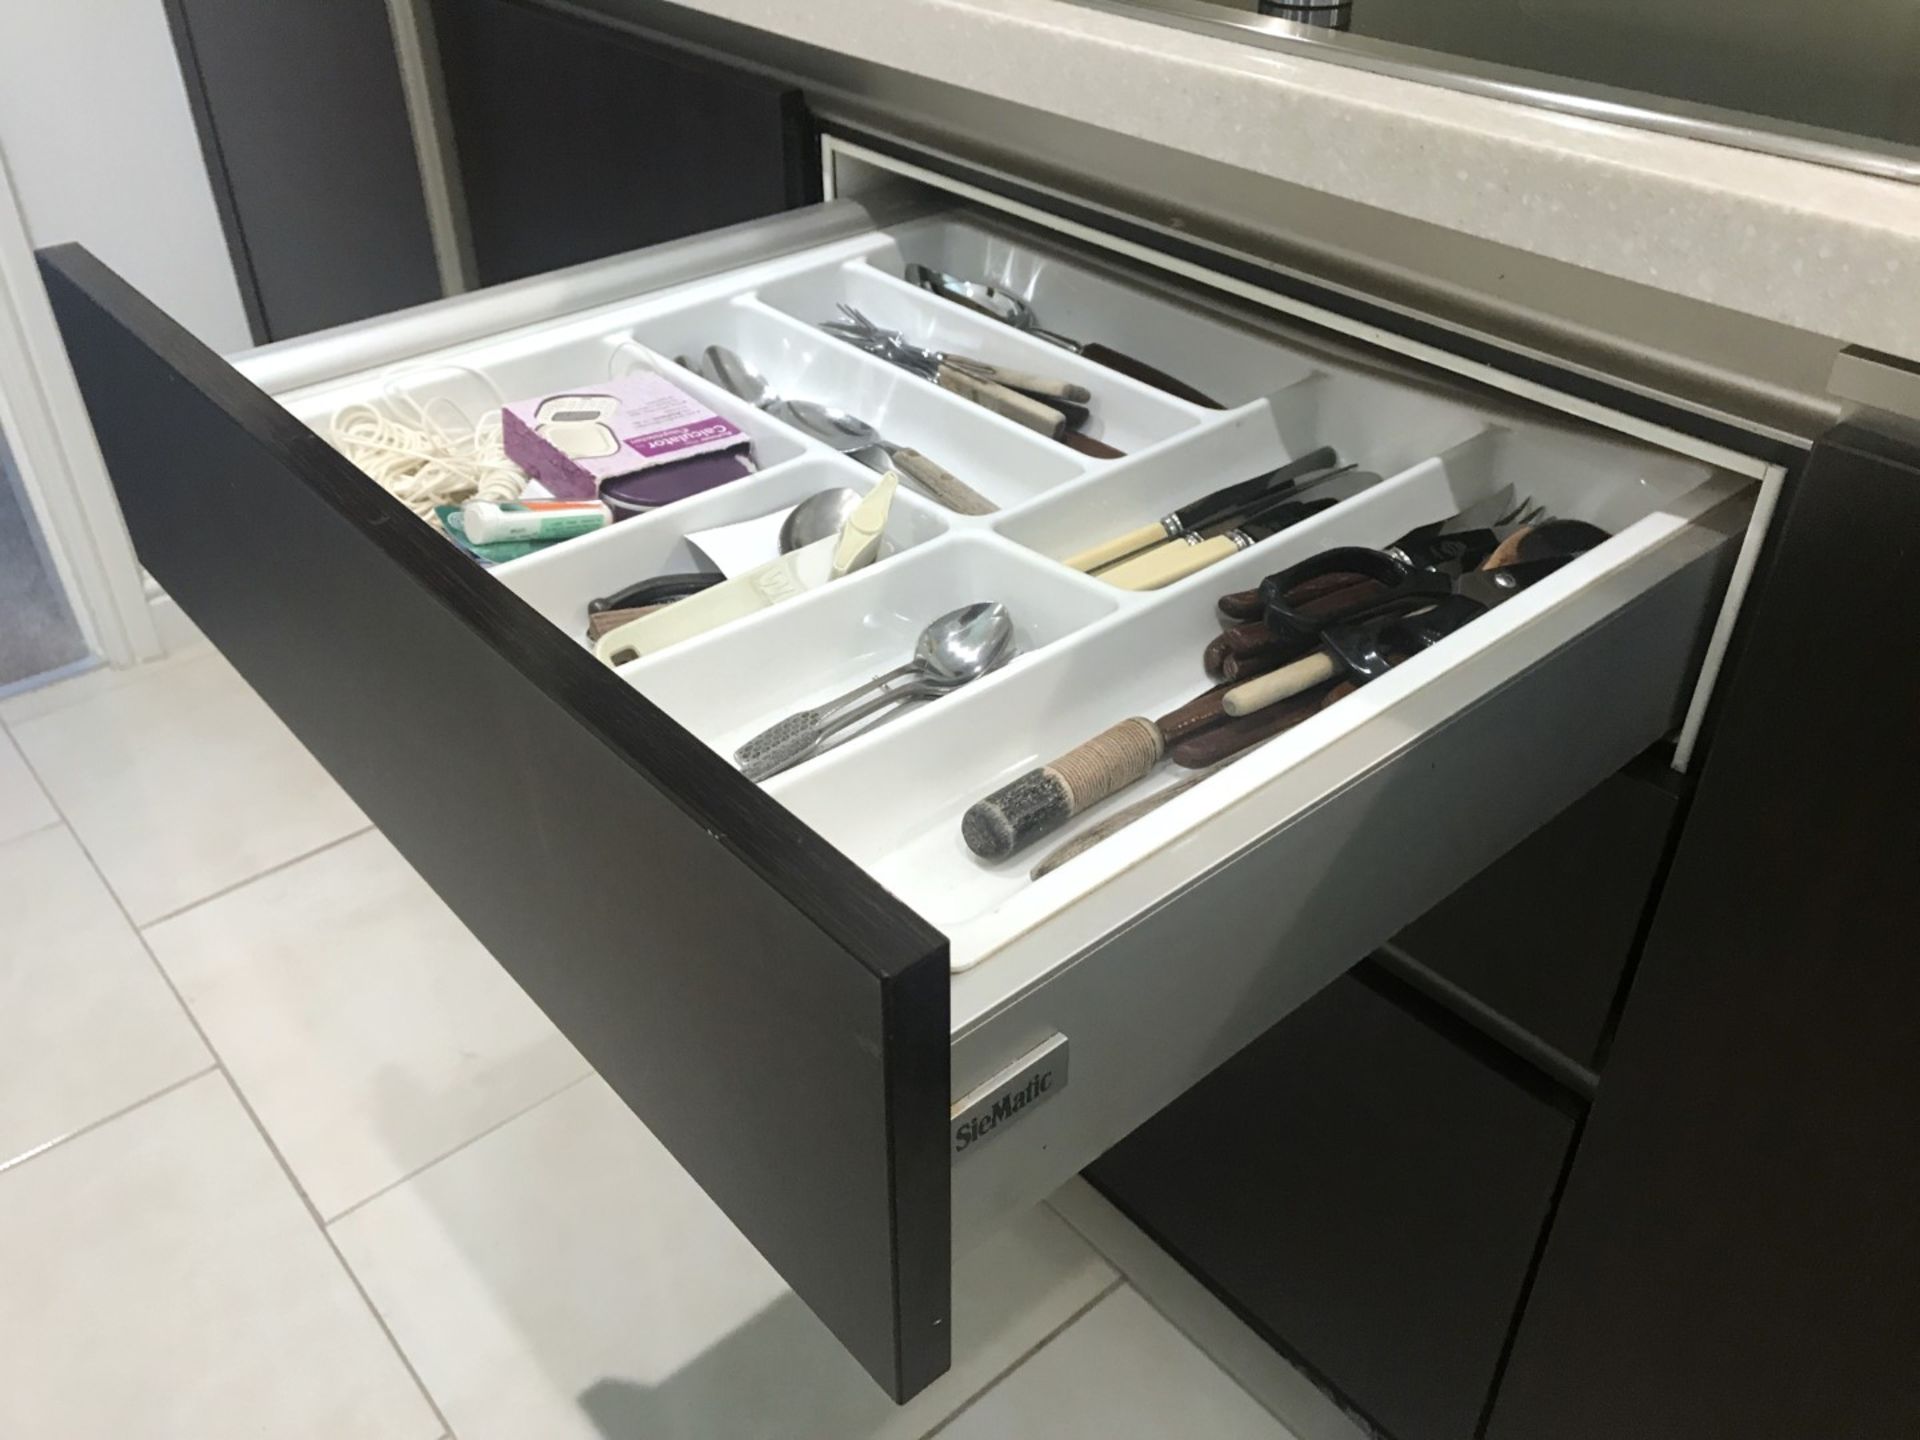 1 x Siematic Contemporary Fitted Kitchen Featuring Wenge Soft Close Handleless Doors, Corian - Image 53 of 64